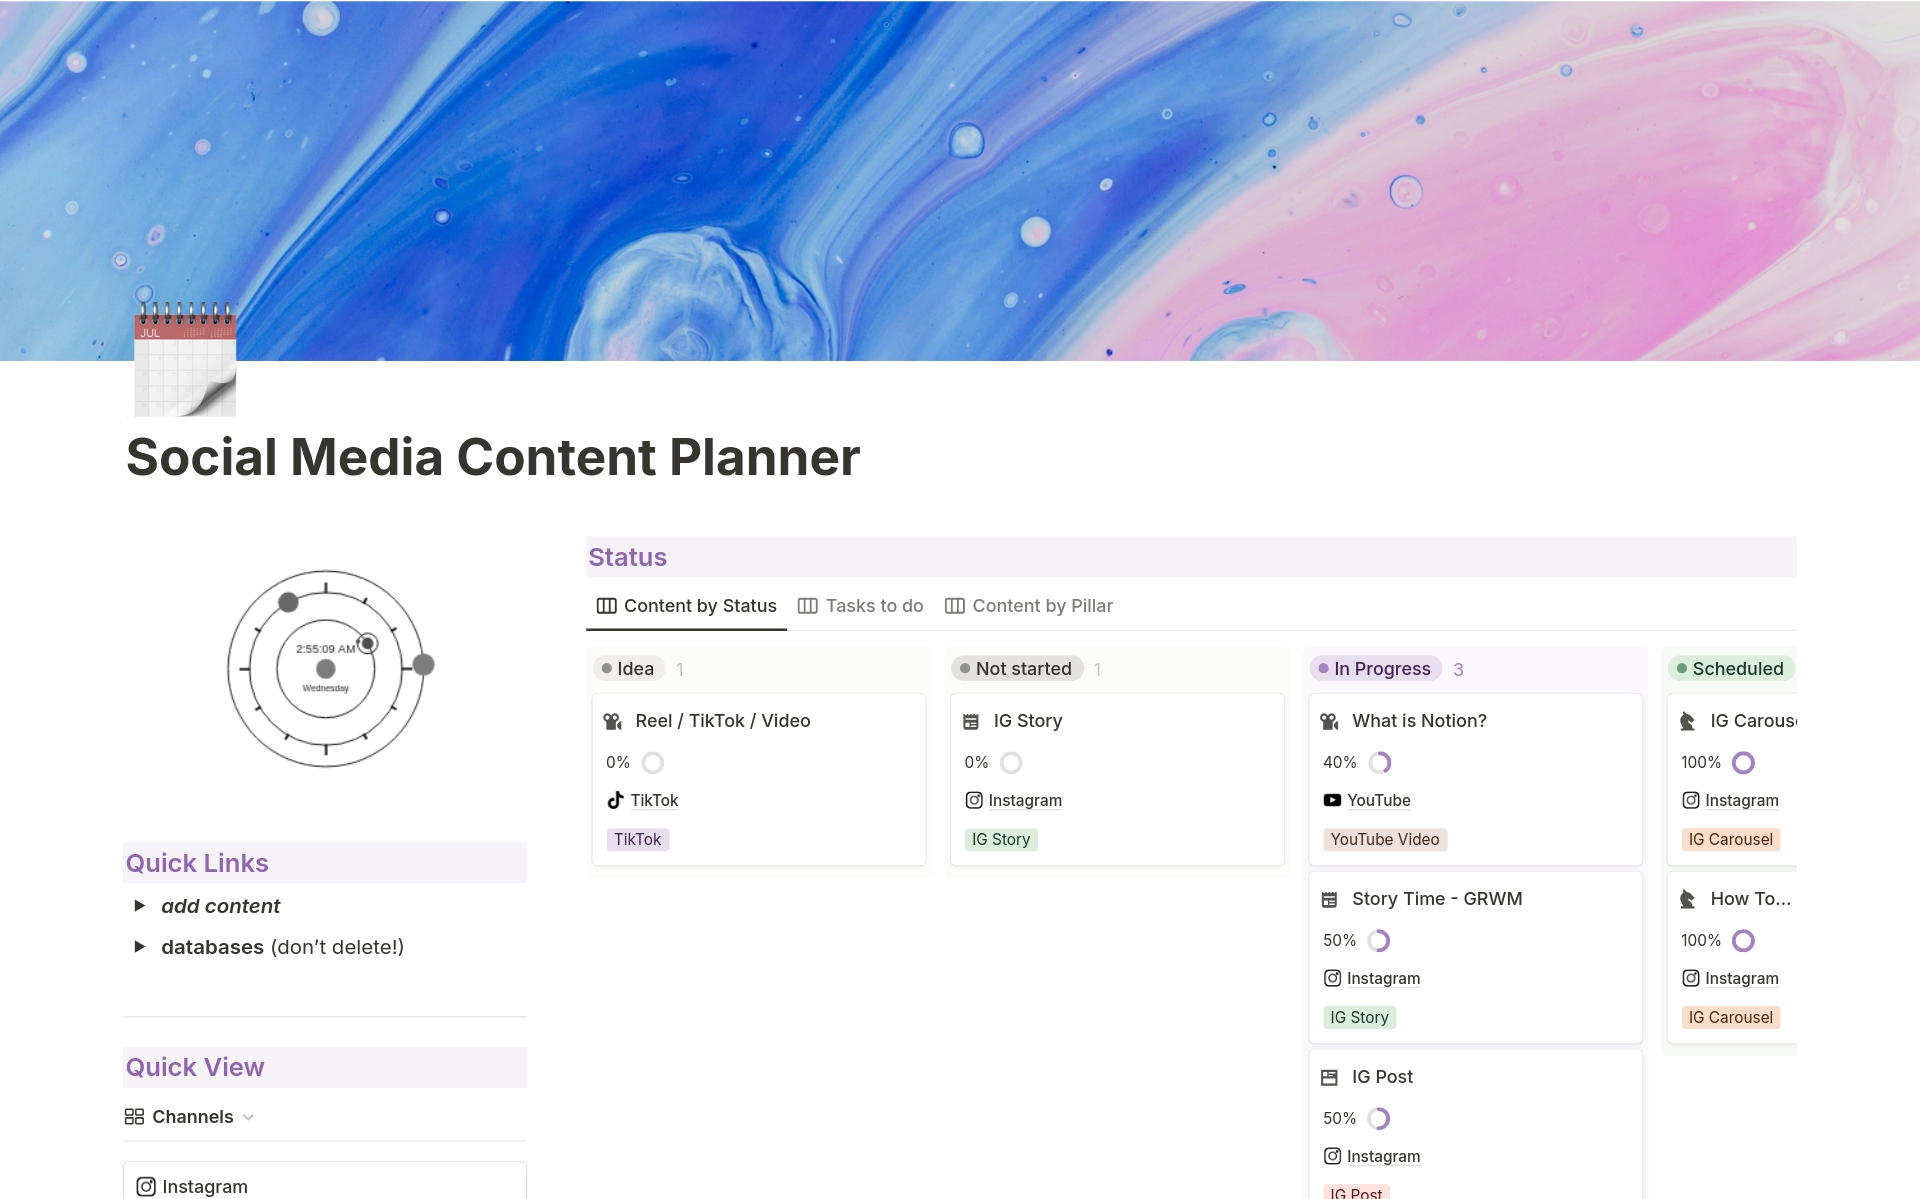 Don't let content creation stress you out any longer - try this Social Media Content Planner Notion dashboard today and take the first step towards a more organized and successful social media strategy!